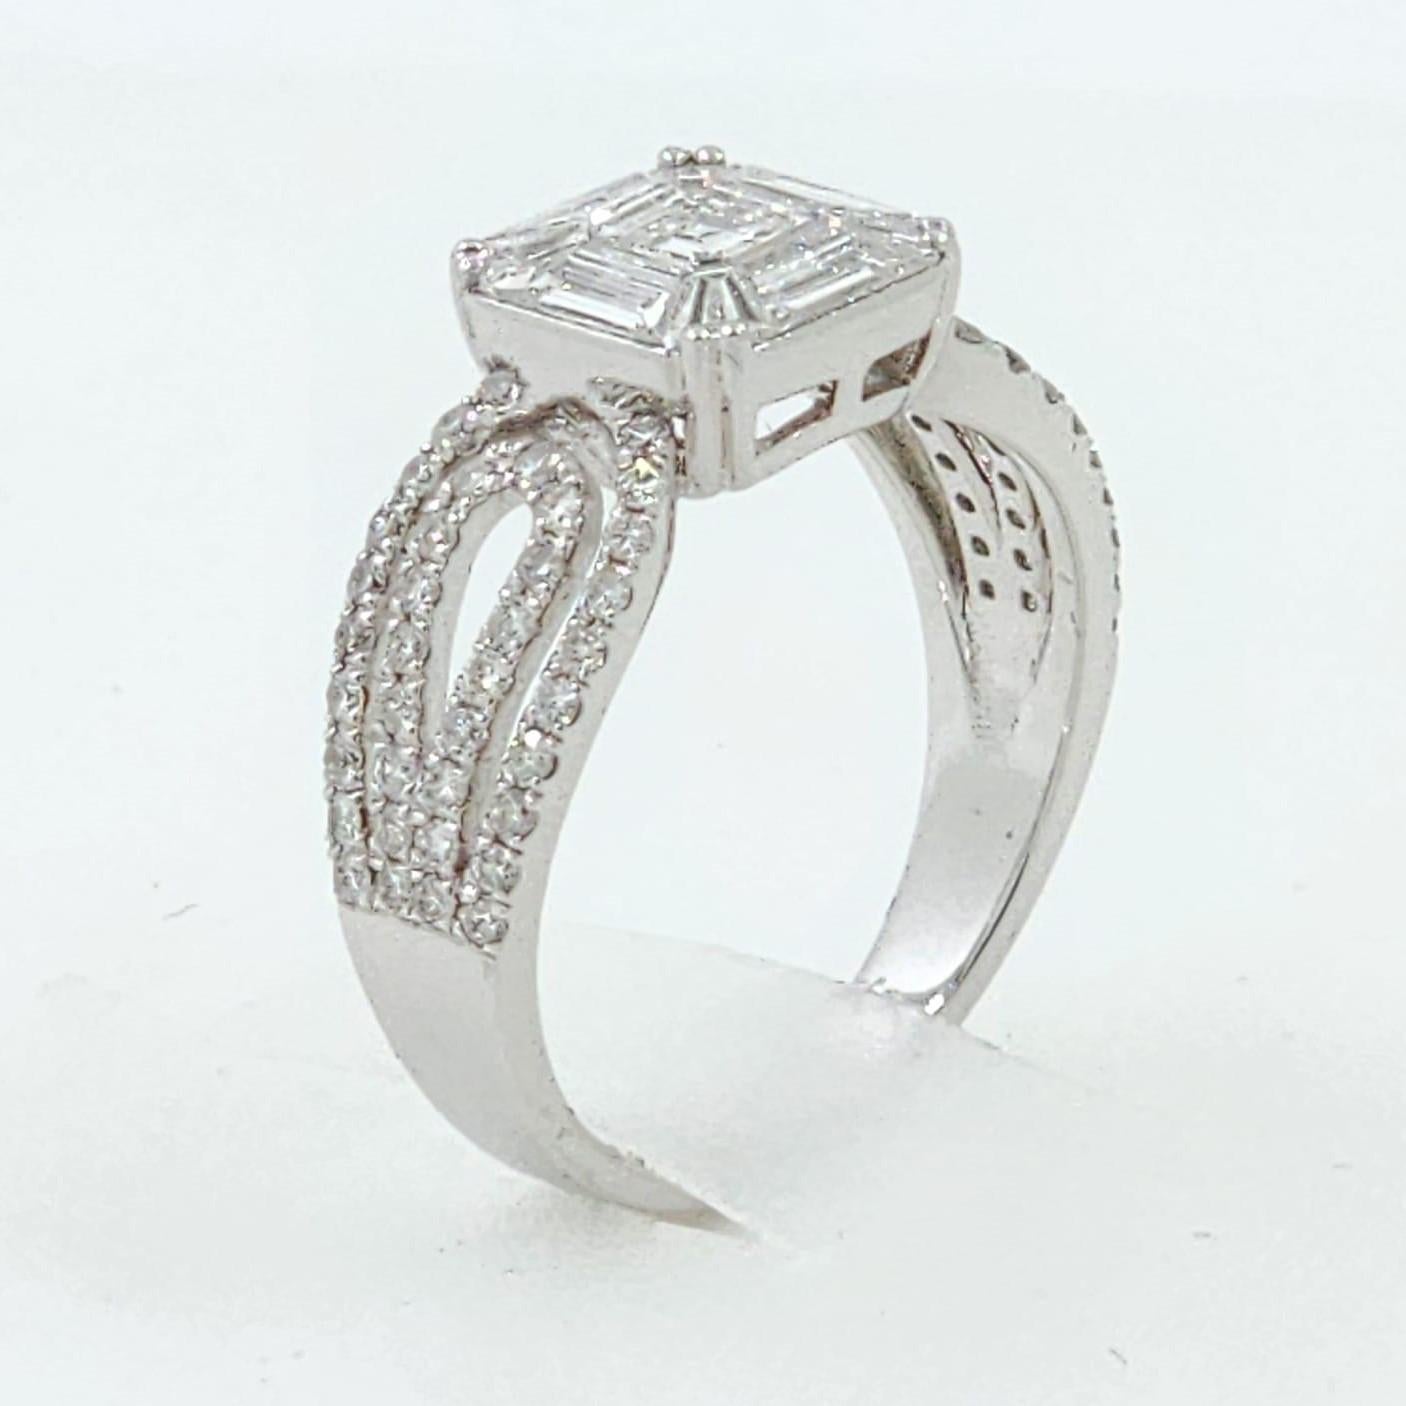 Contemporary 1.06 Carat Illusion Setting Diamonds Ring in 18K White Gold For Sale